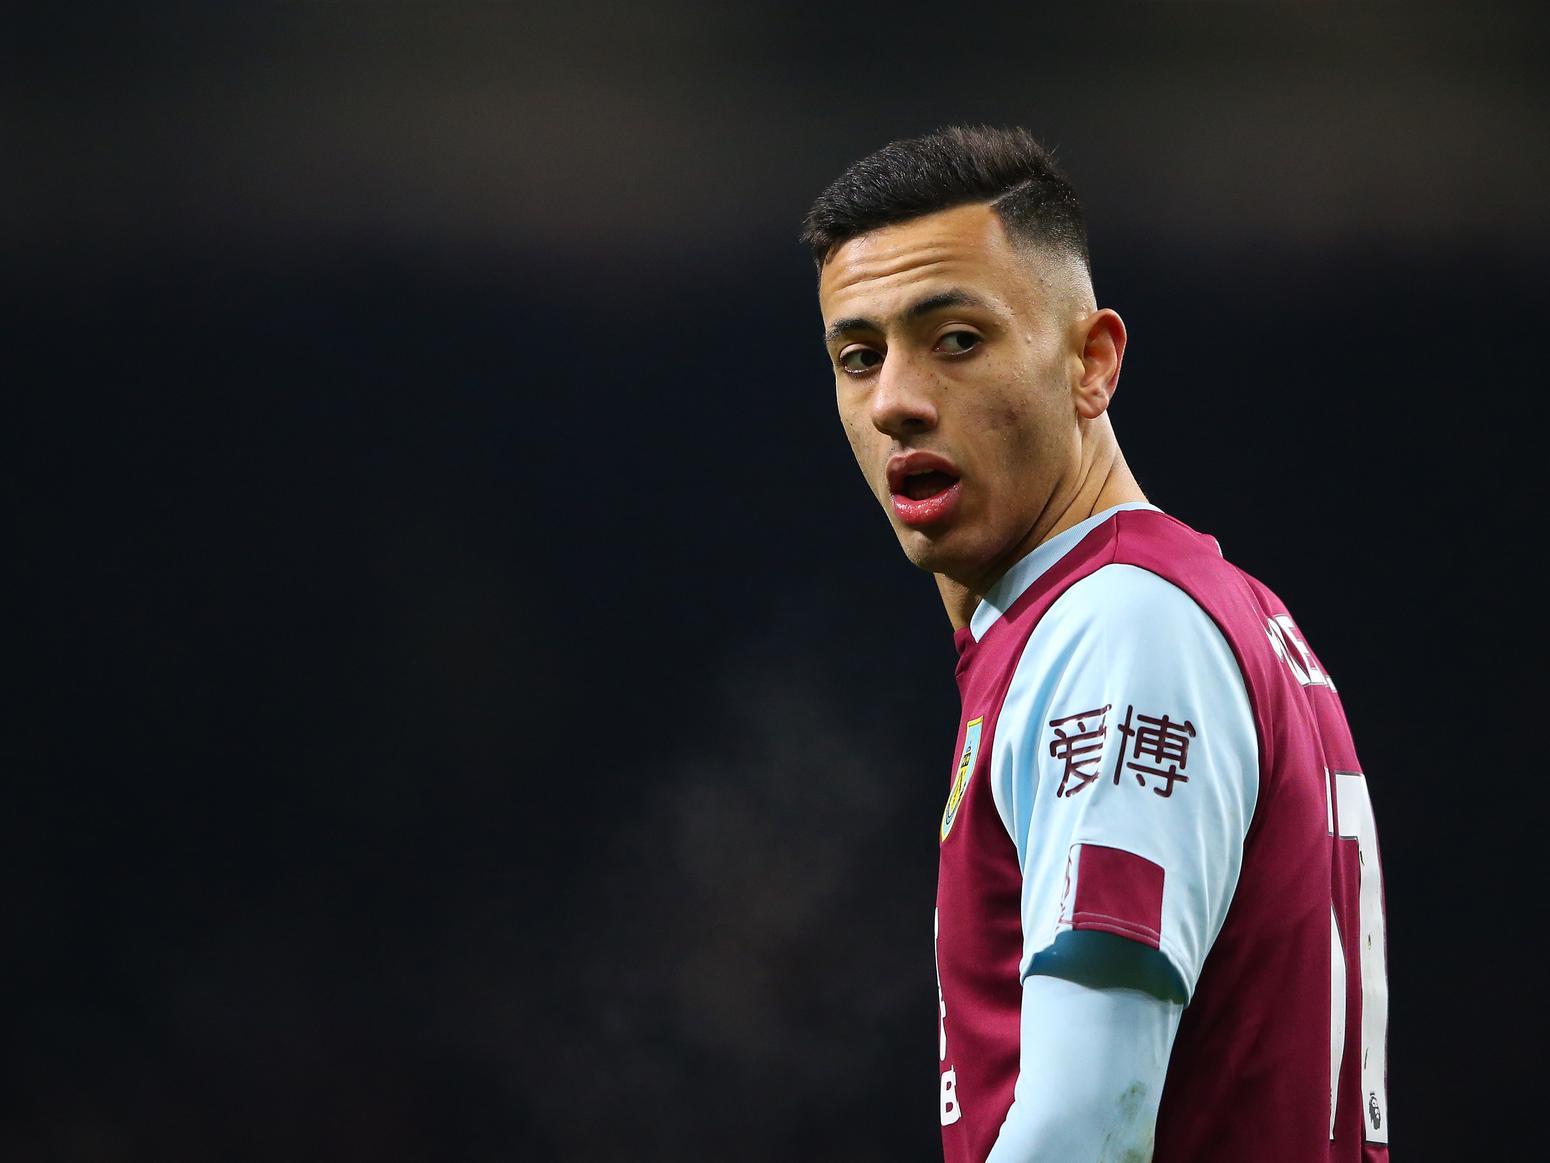 Crystal Palace have put Burnley's winger Dwight McNeil, 20, top of their list of replacements if Ivory Coast forward Wilfried Zaha, 27, leaves as had been heavily rumoured. (The Sun)